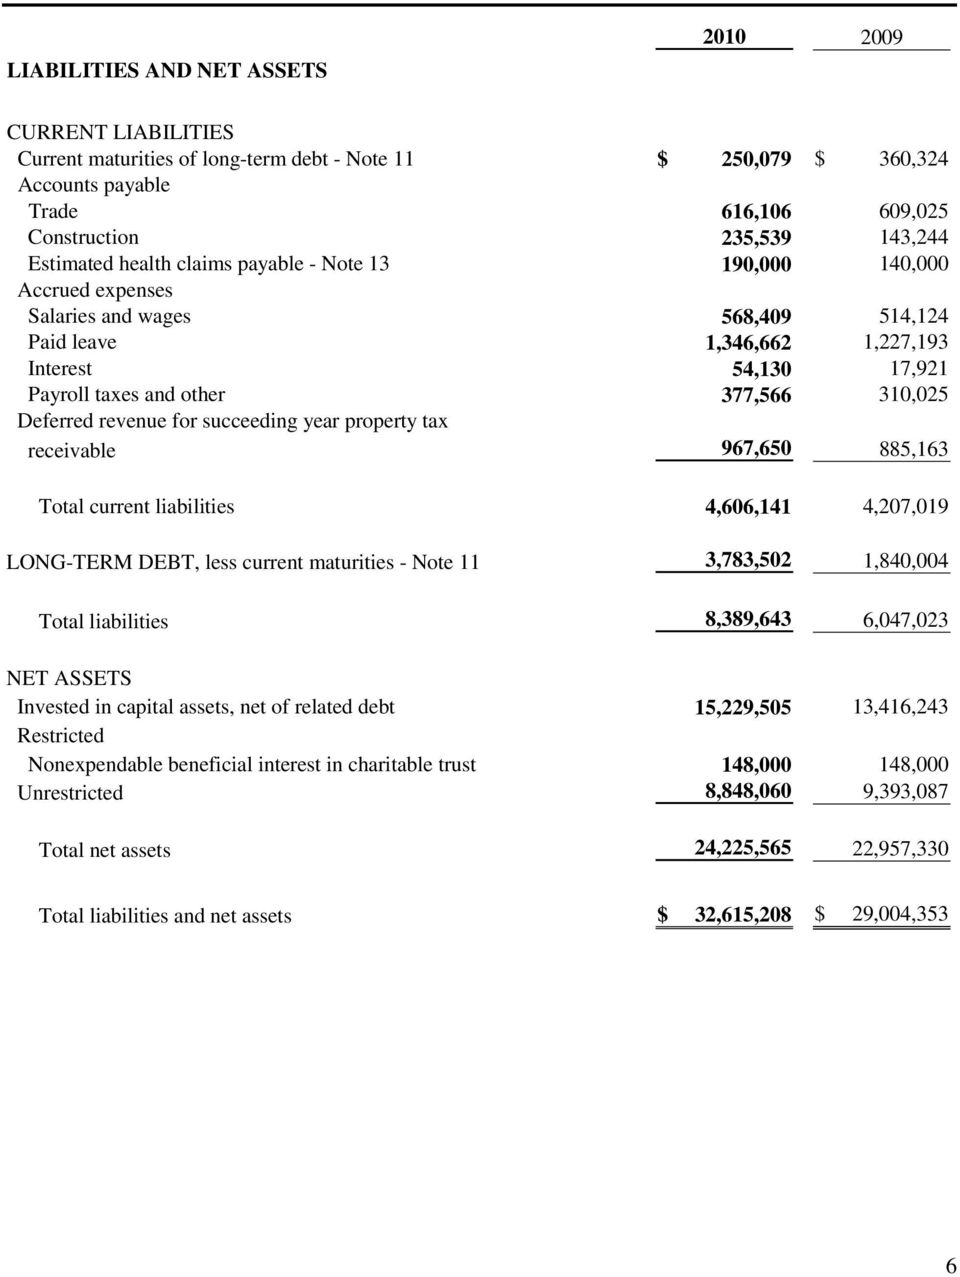 310,025 Deferred revenue for succeeding year property tax receivable 967,650 885,163 Total current liabilities 4,606,141 4,207,019 LONG-TERM DEBT, less current maturities - Note 11 3,783,502